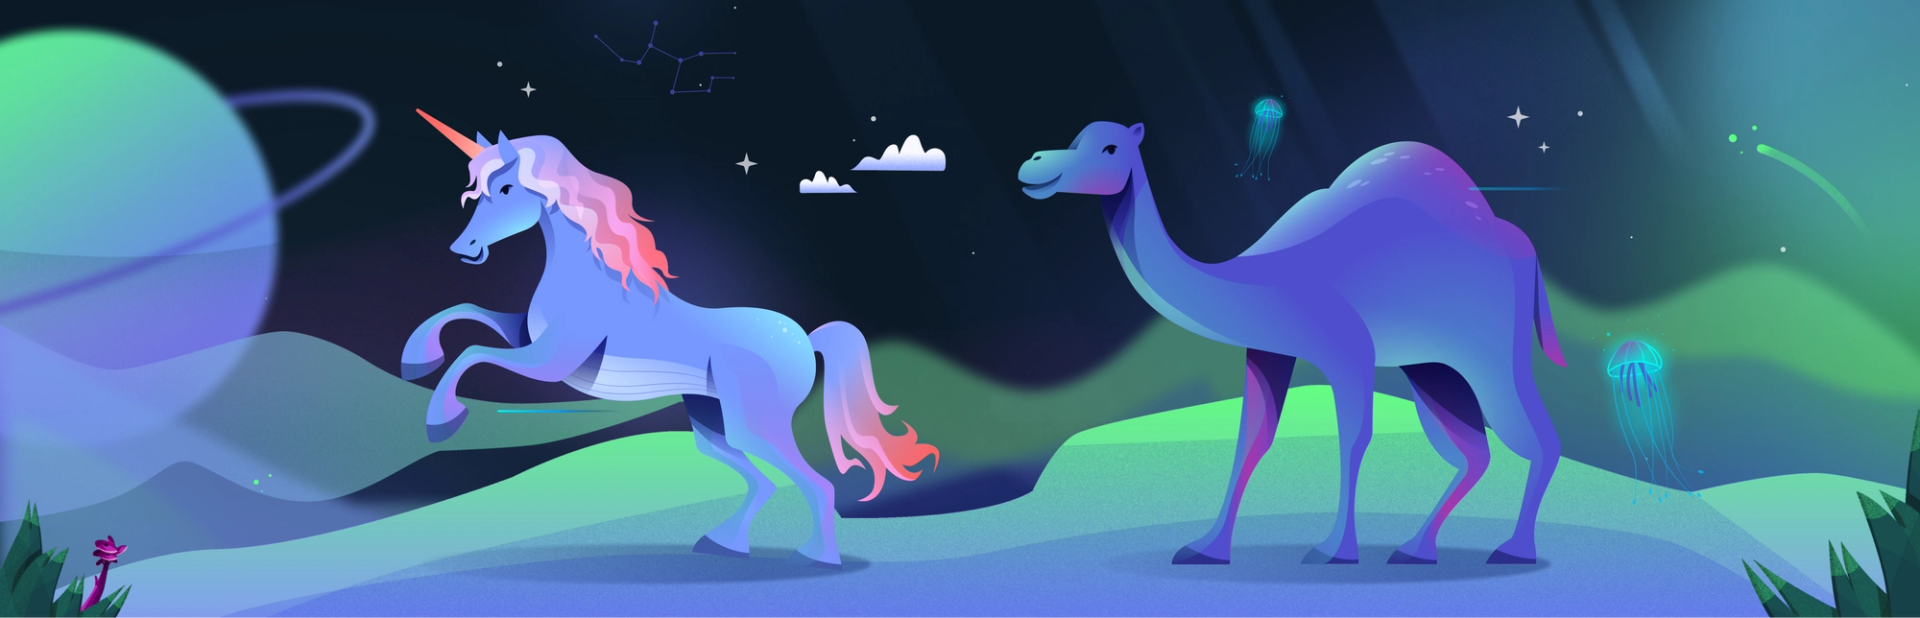 Creative Marketer: Stop Trying to Be a “Unicorn”. Be a Camel. - Superside